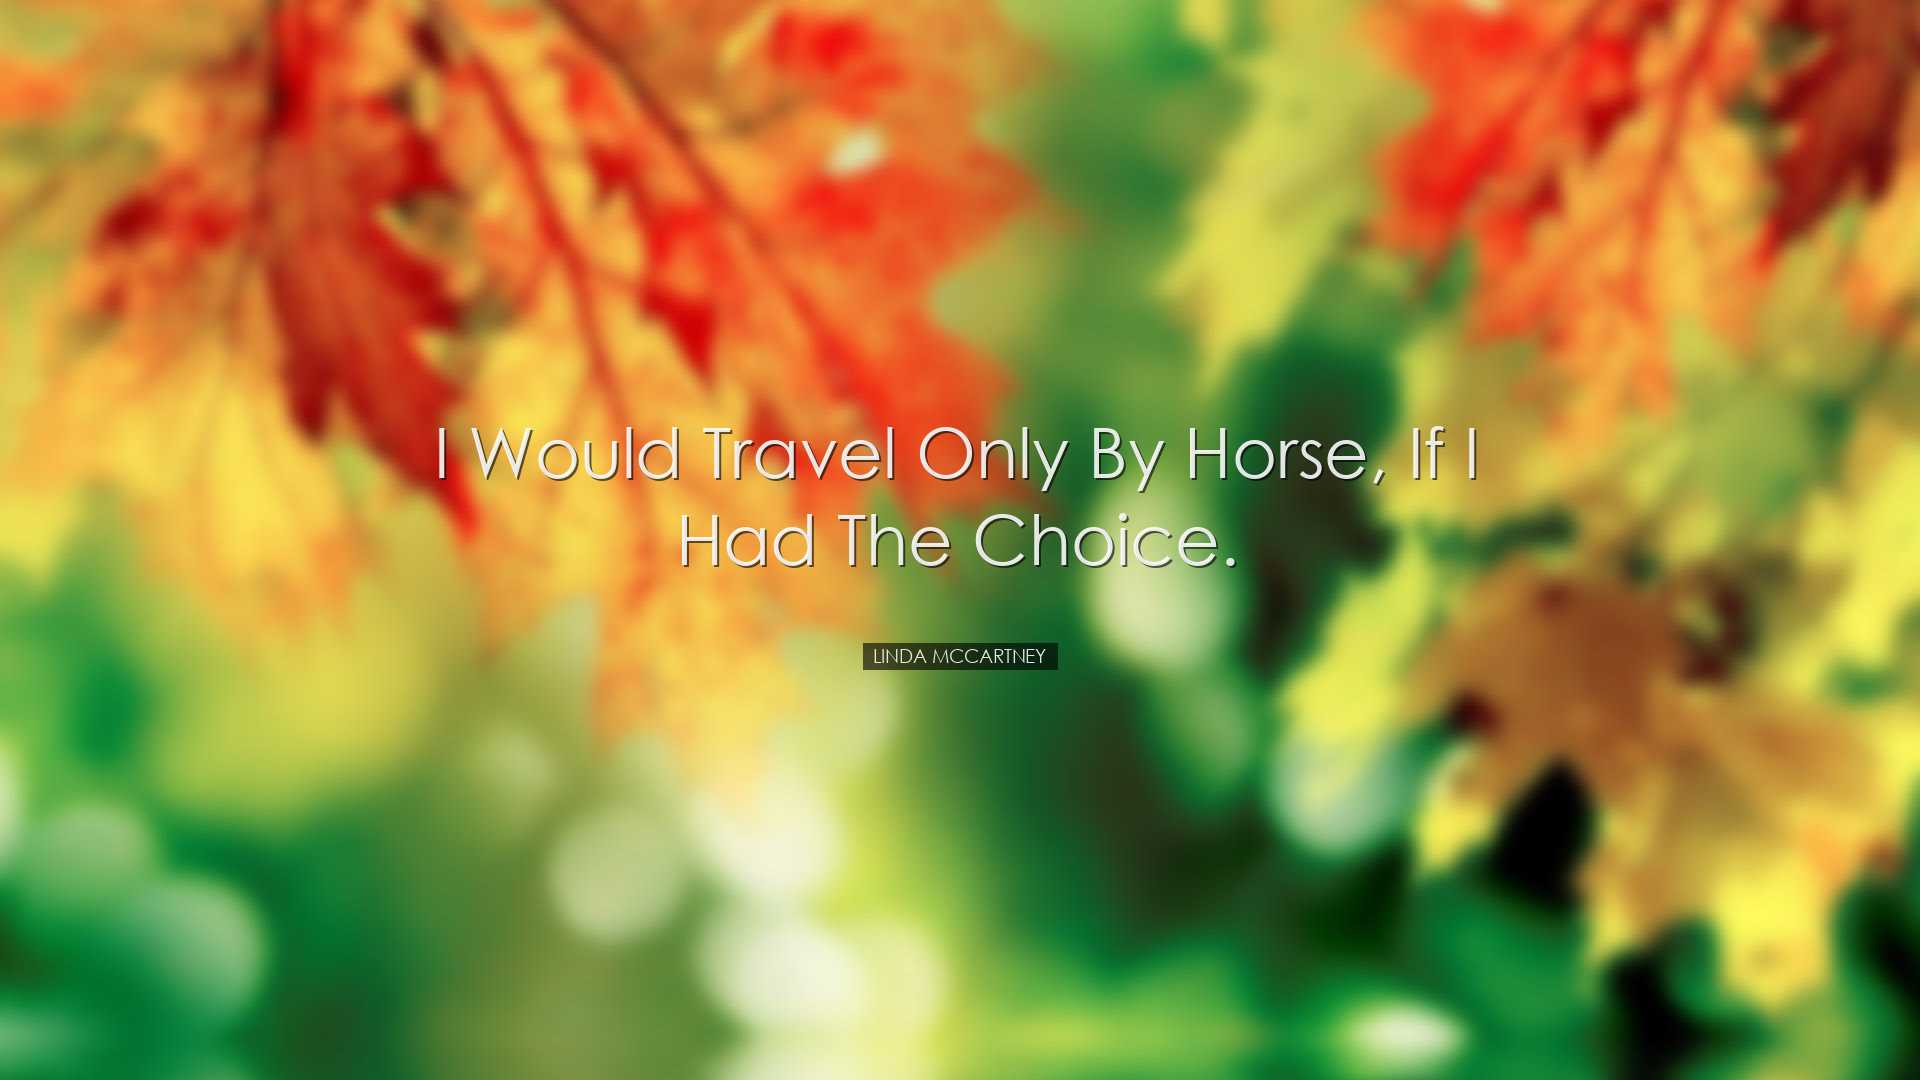 I would travel only by horse, if I had the choice. - Linda McCartn